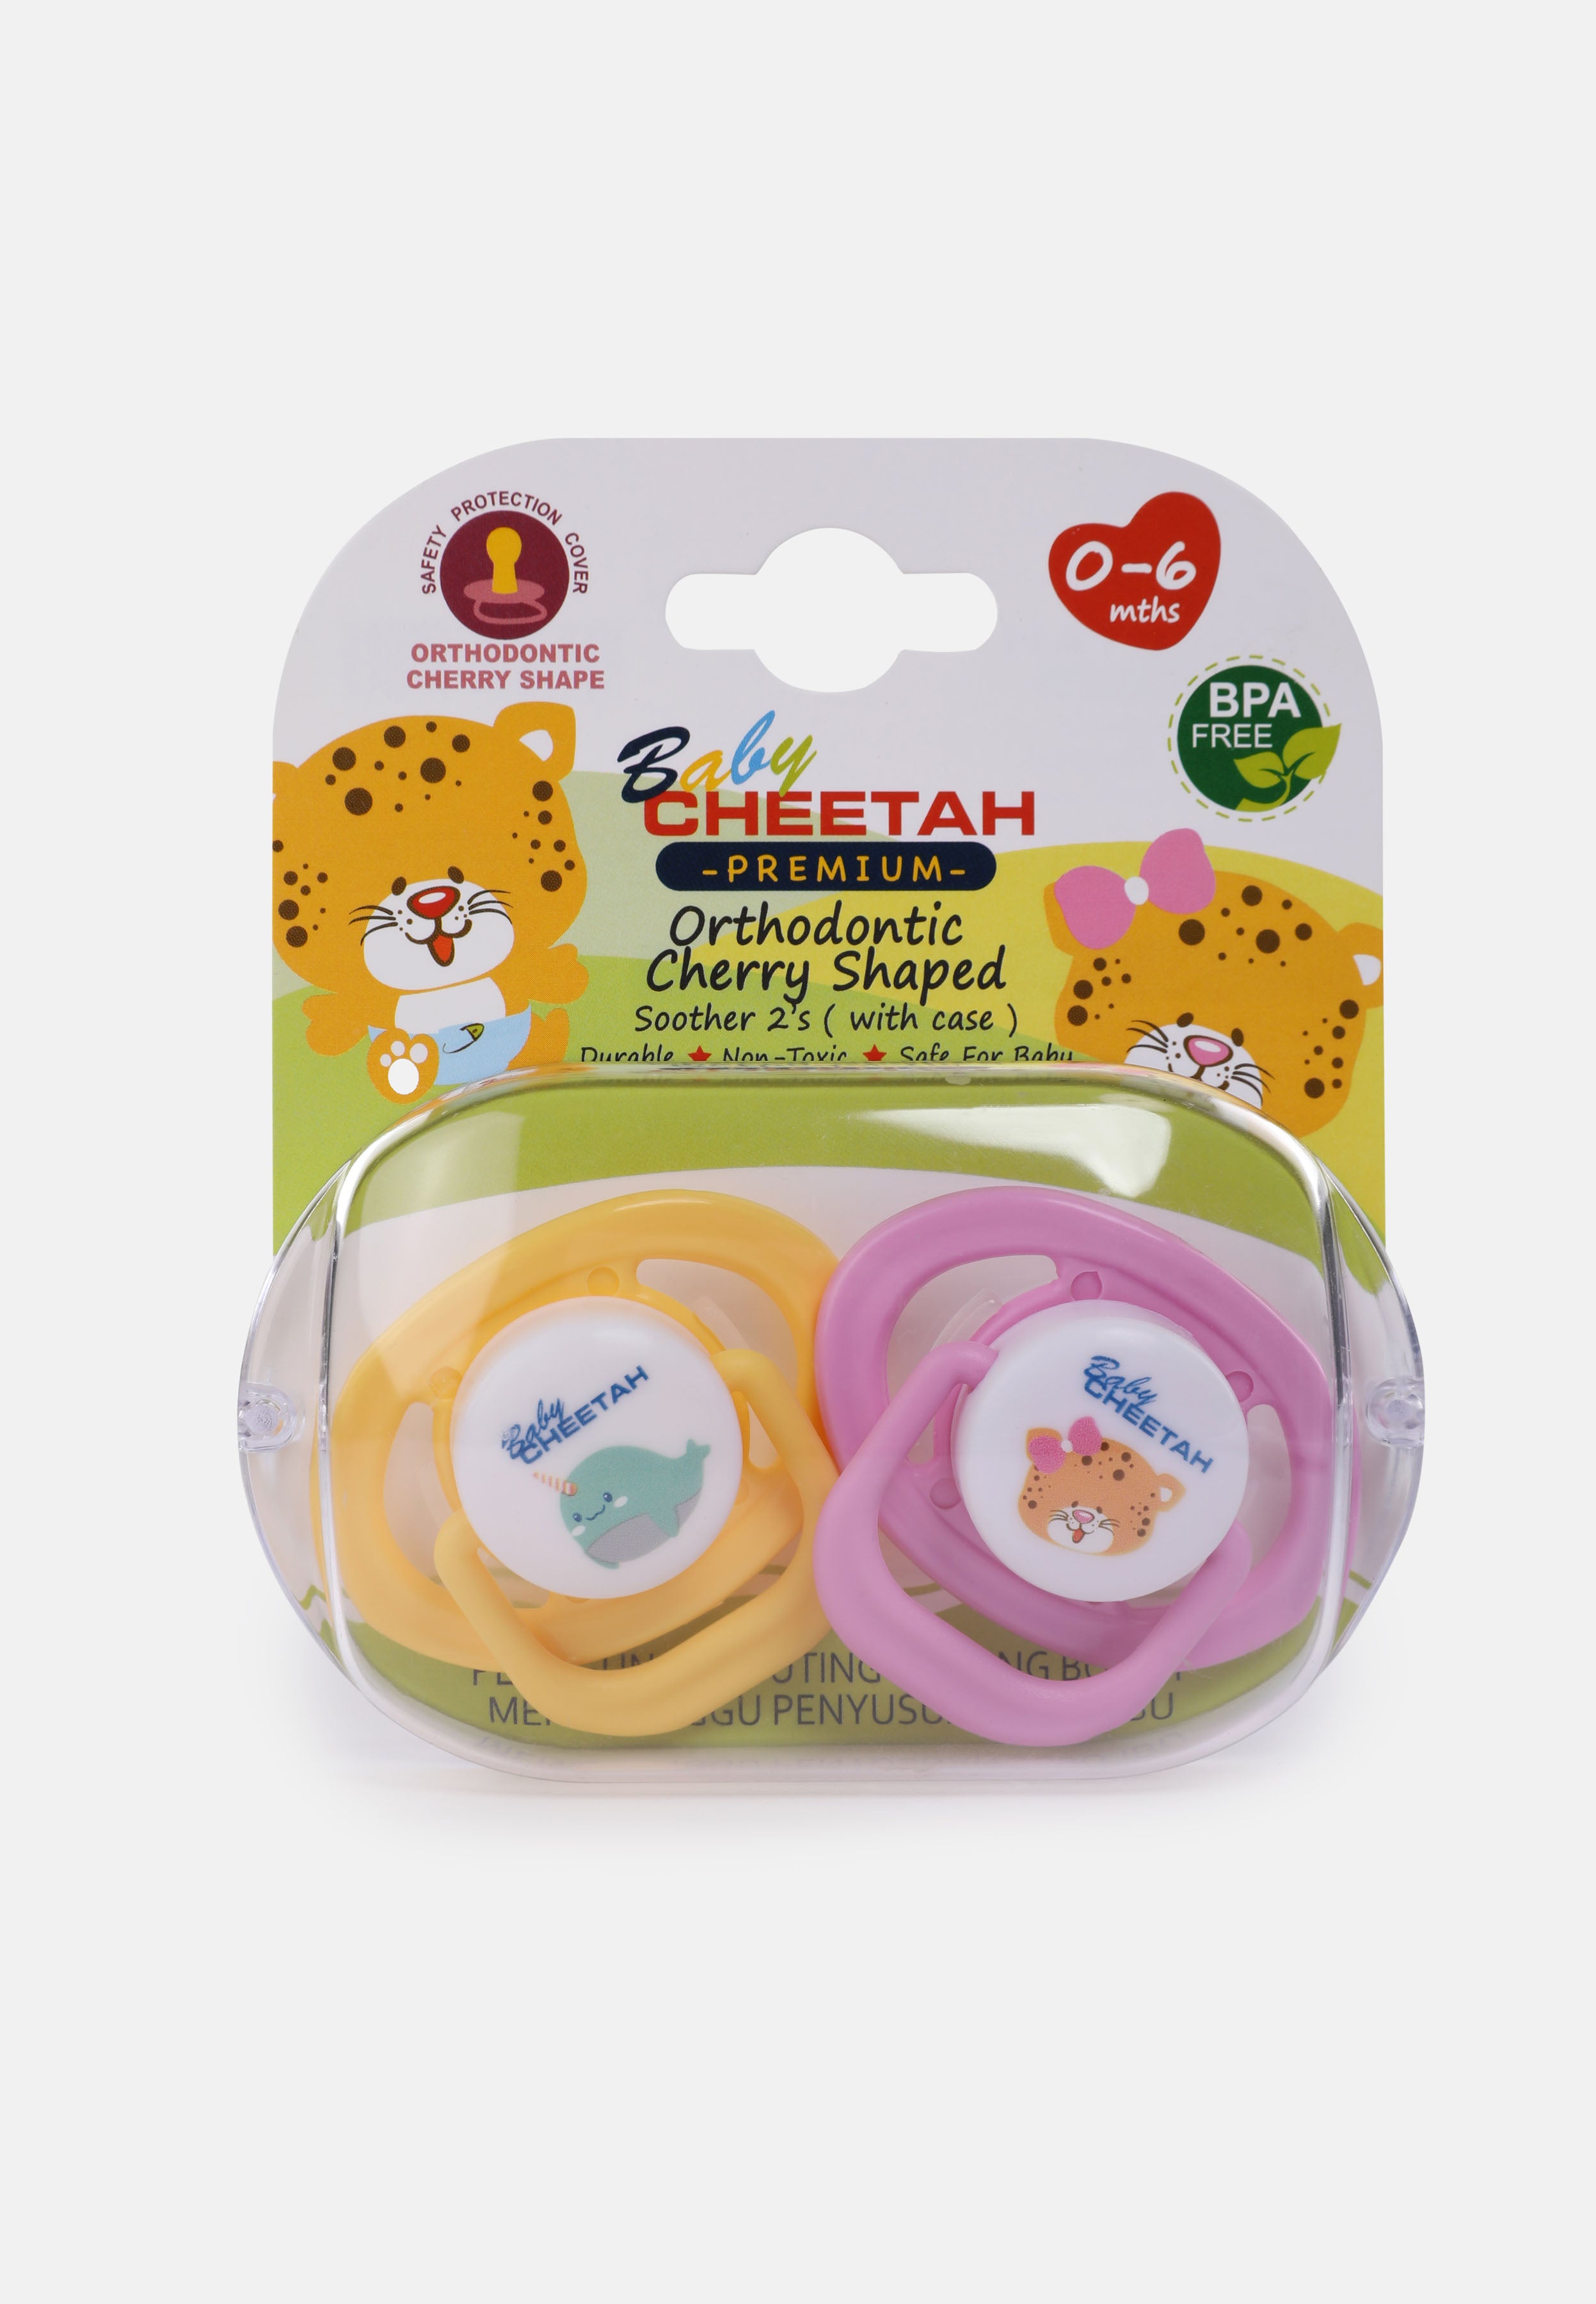 Baby Cheetah Soother with Case (2 IN 1) - Cherry Teats (0-6M) - CBB-ST21080 N